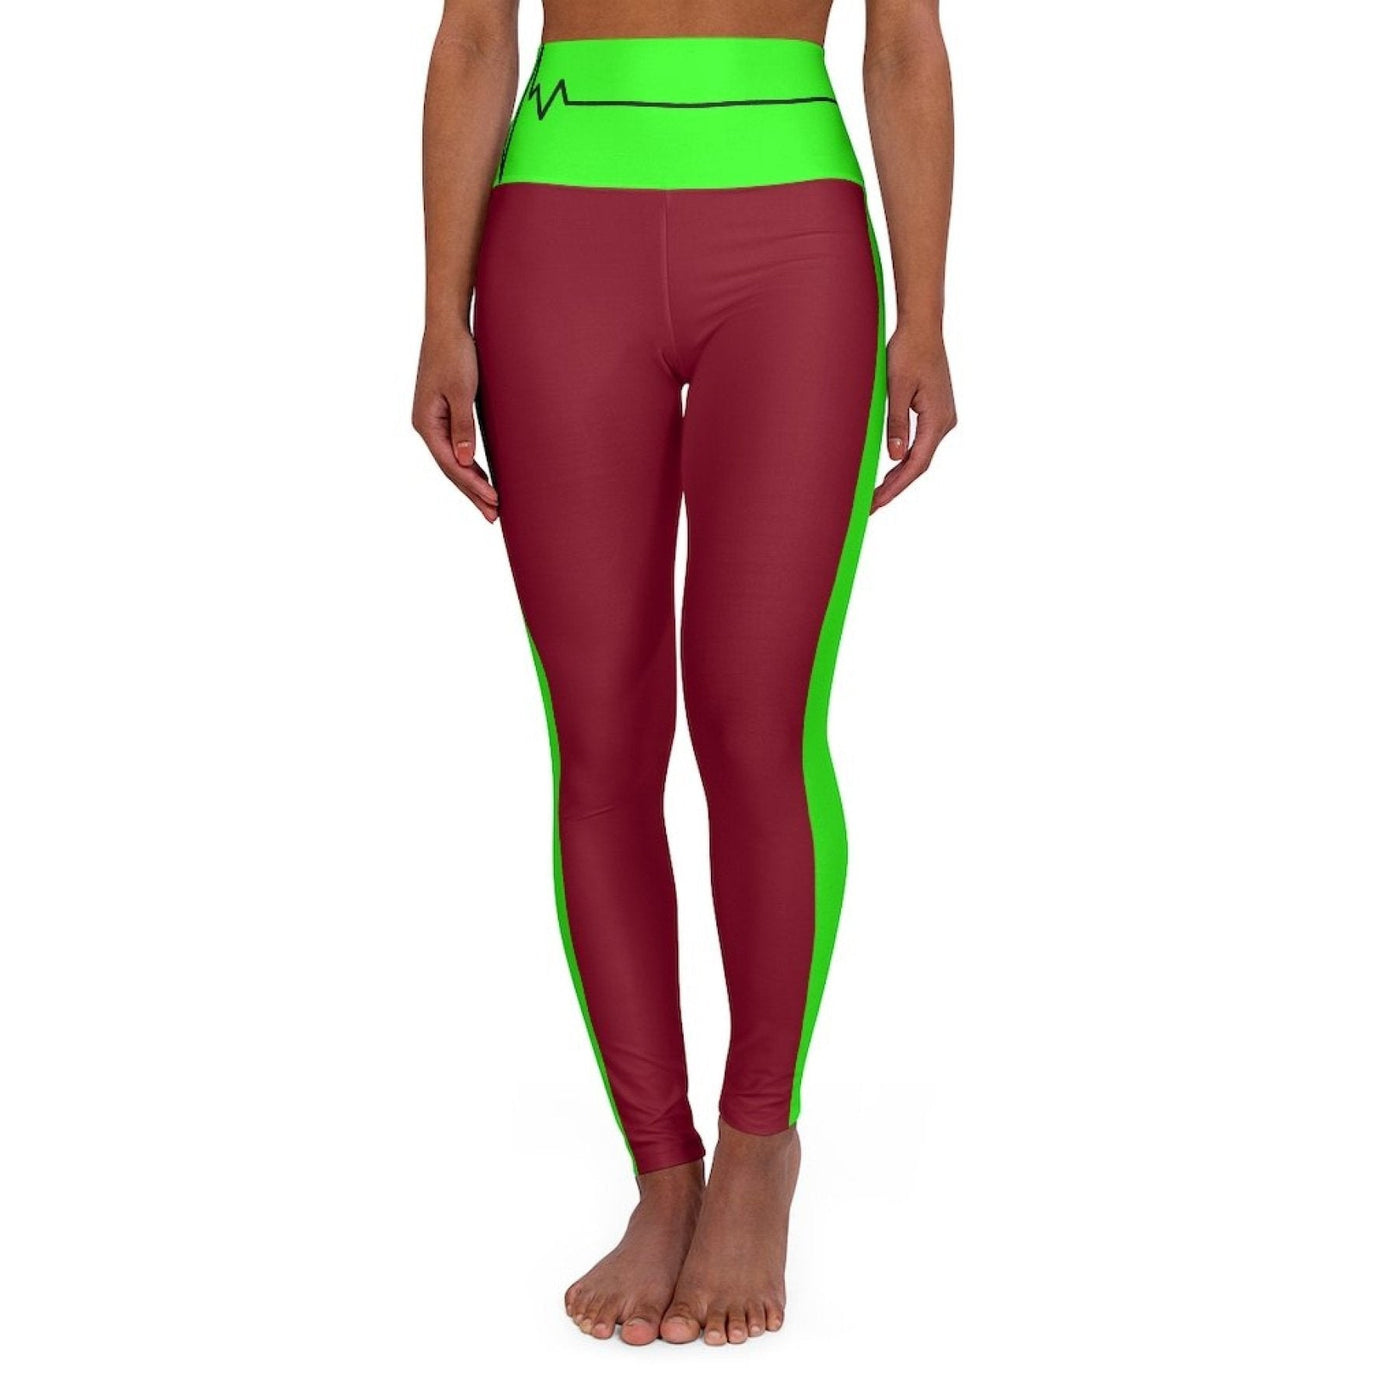 High Waisted Yoga Leggings Dark Red And Neon Green Beating Heart Sports Pants